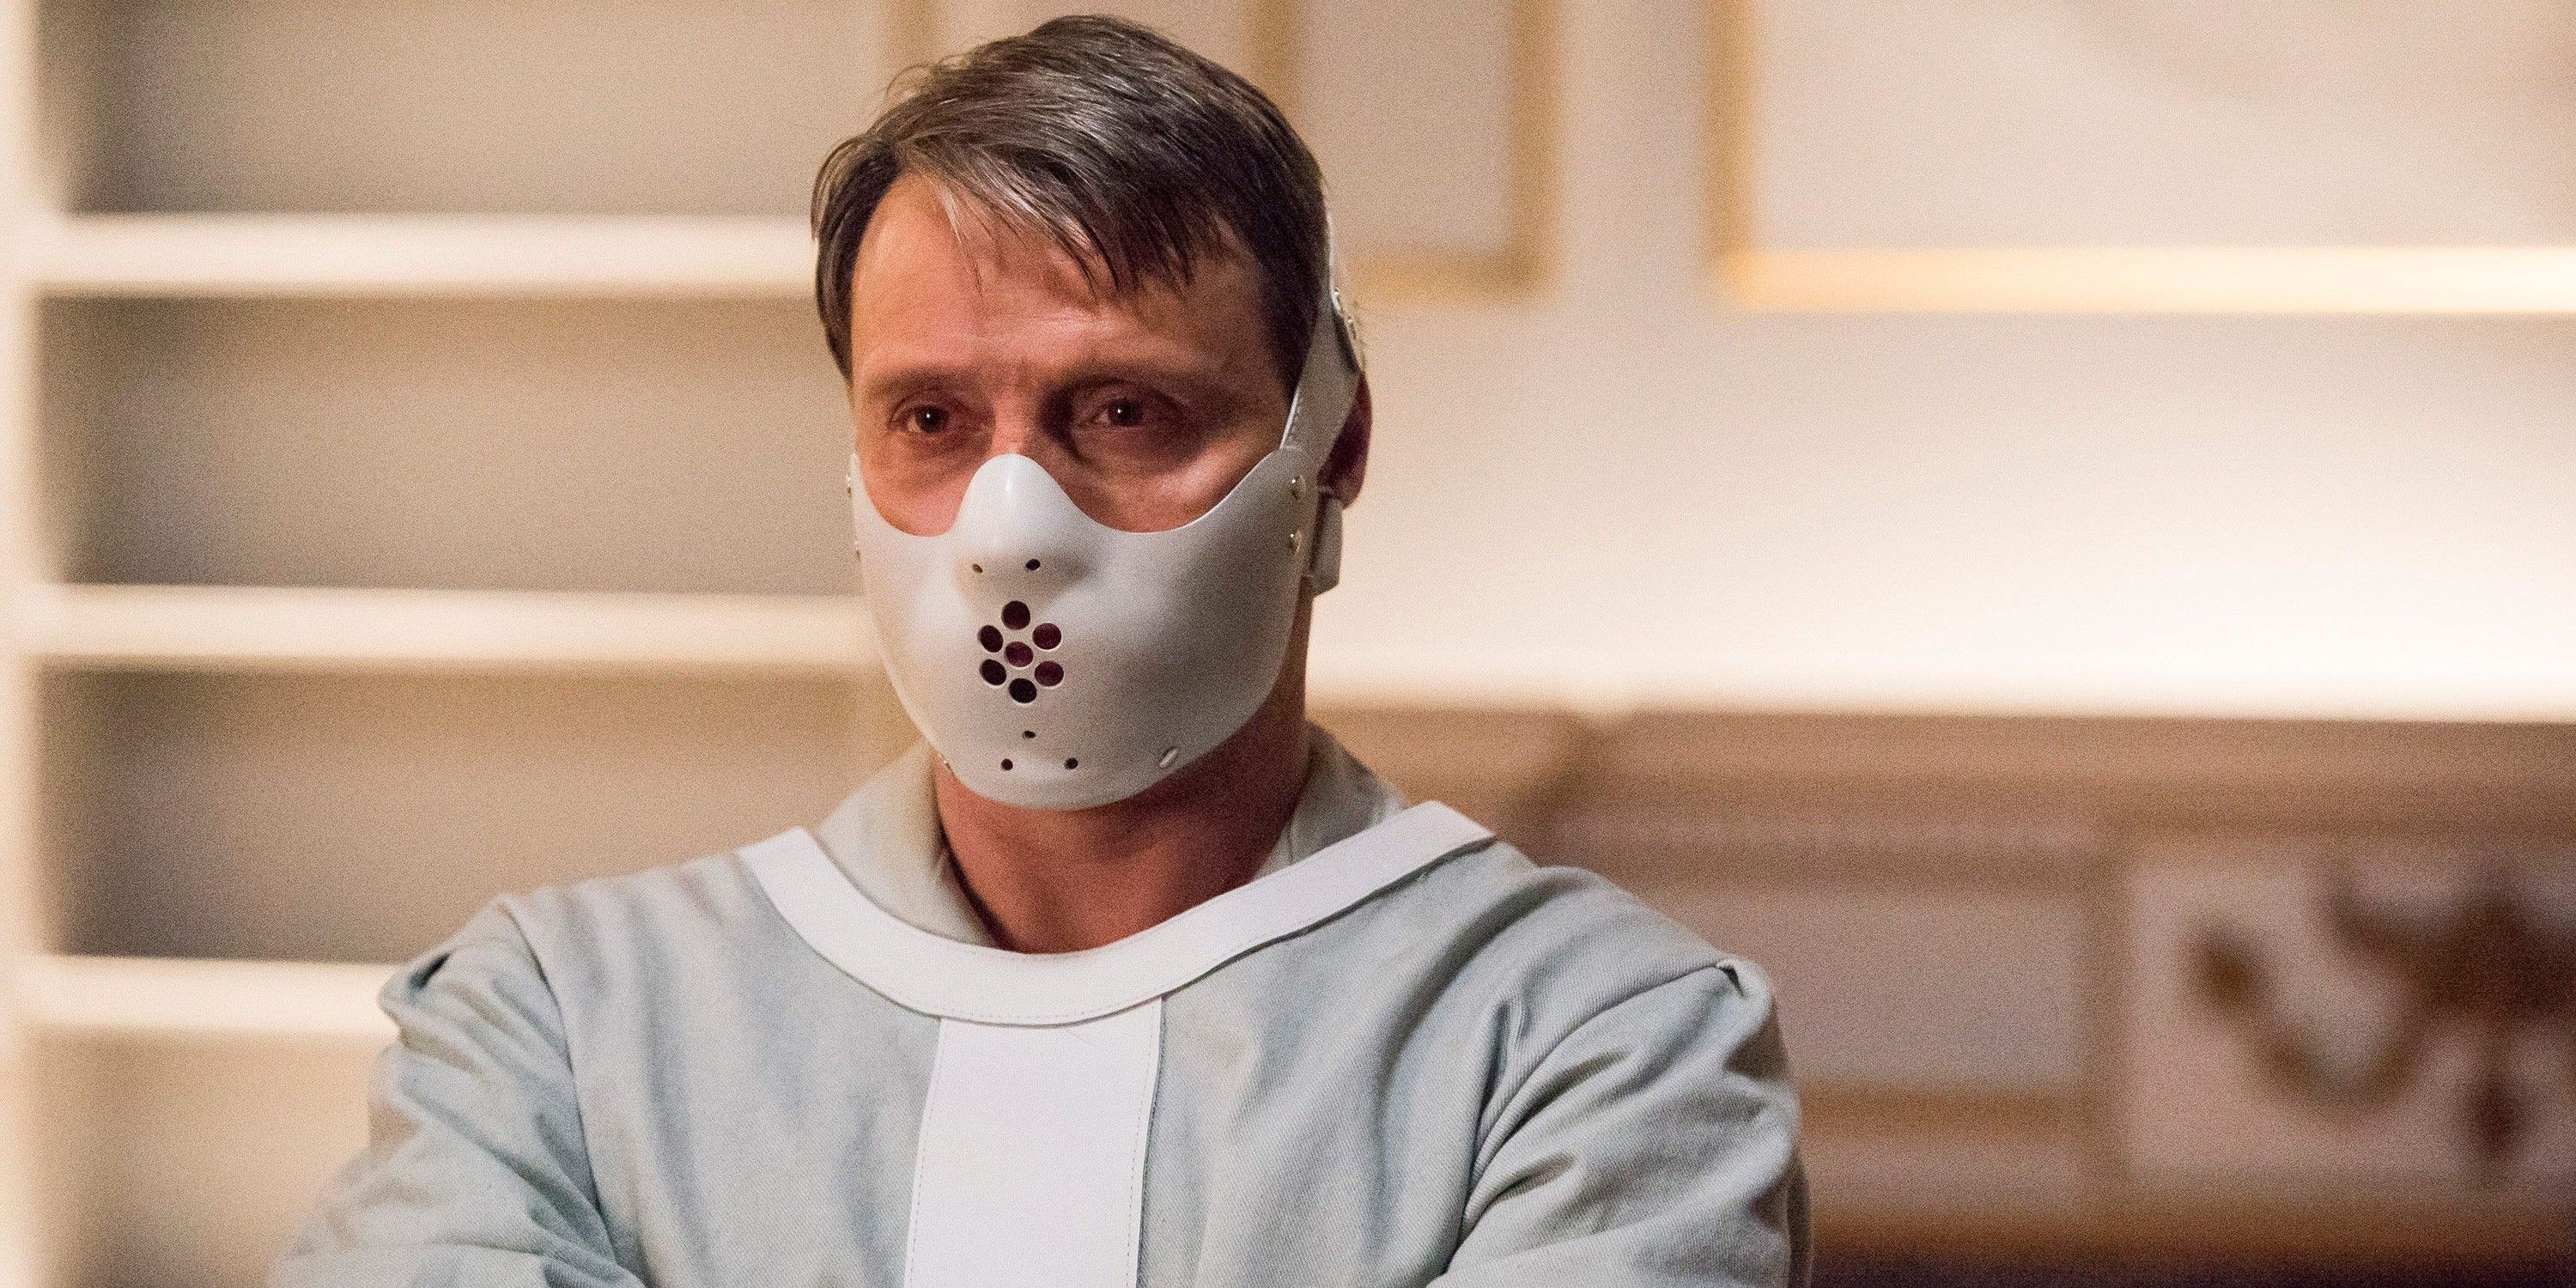 Hannibal in a face muzzle in season 4 of Hannibal